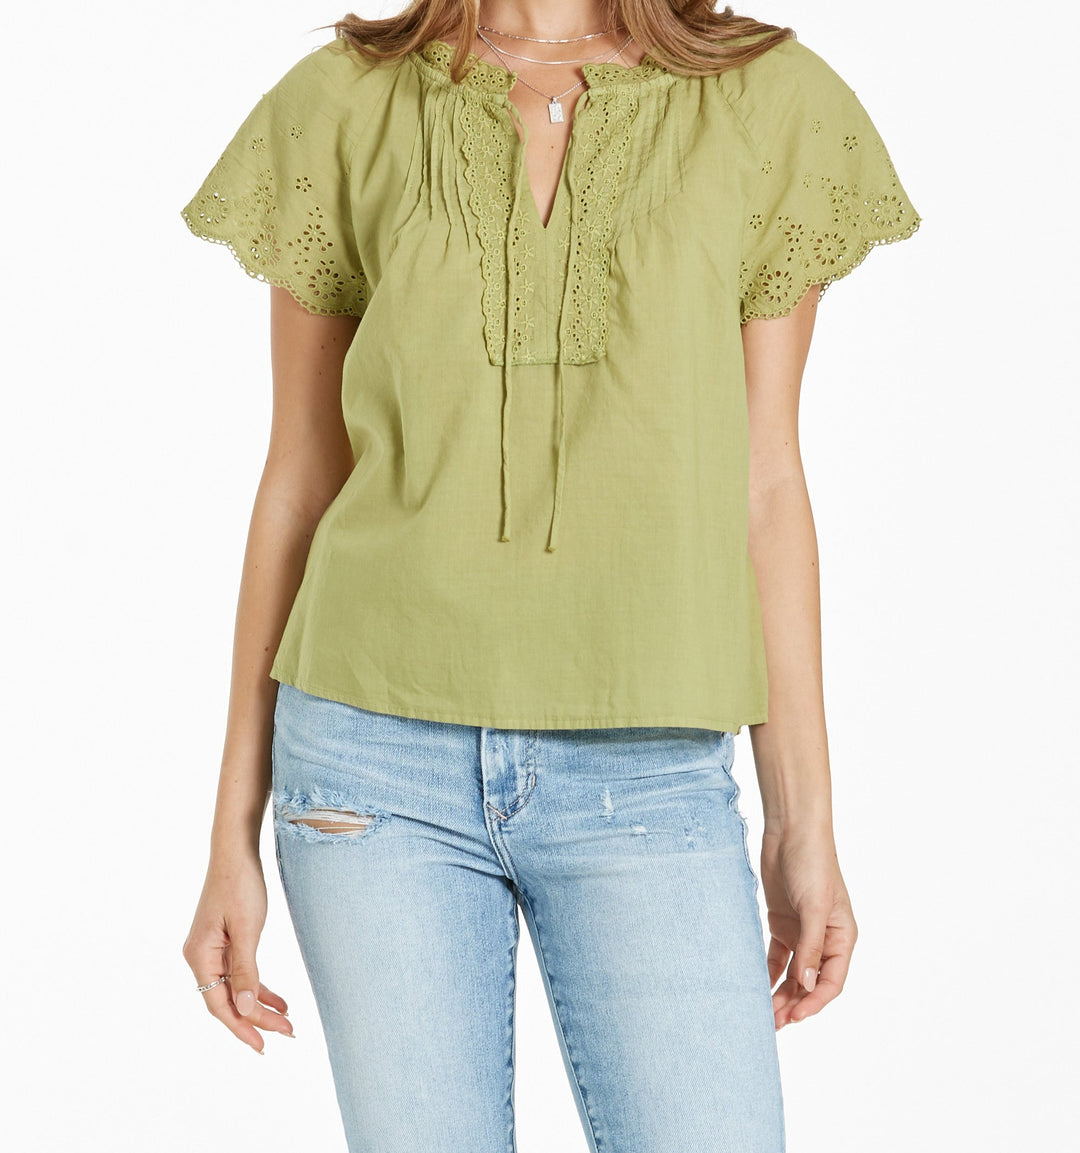 image of a female model wearing a DYLAN EMBROIDERED DETAIL TOP GREEN MEADOW DEAR JOHN DENIM 